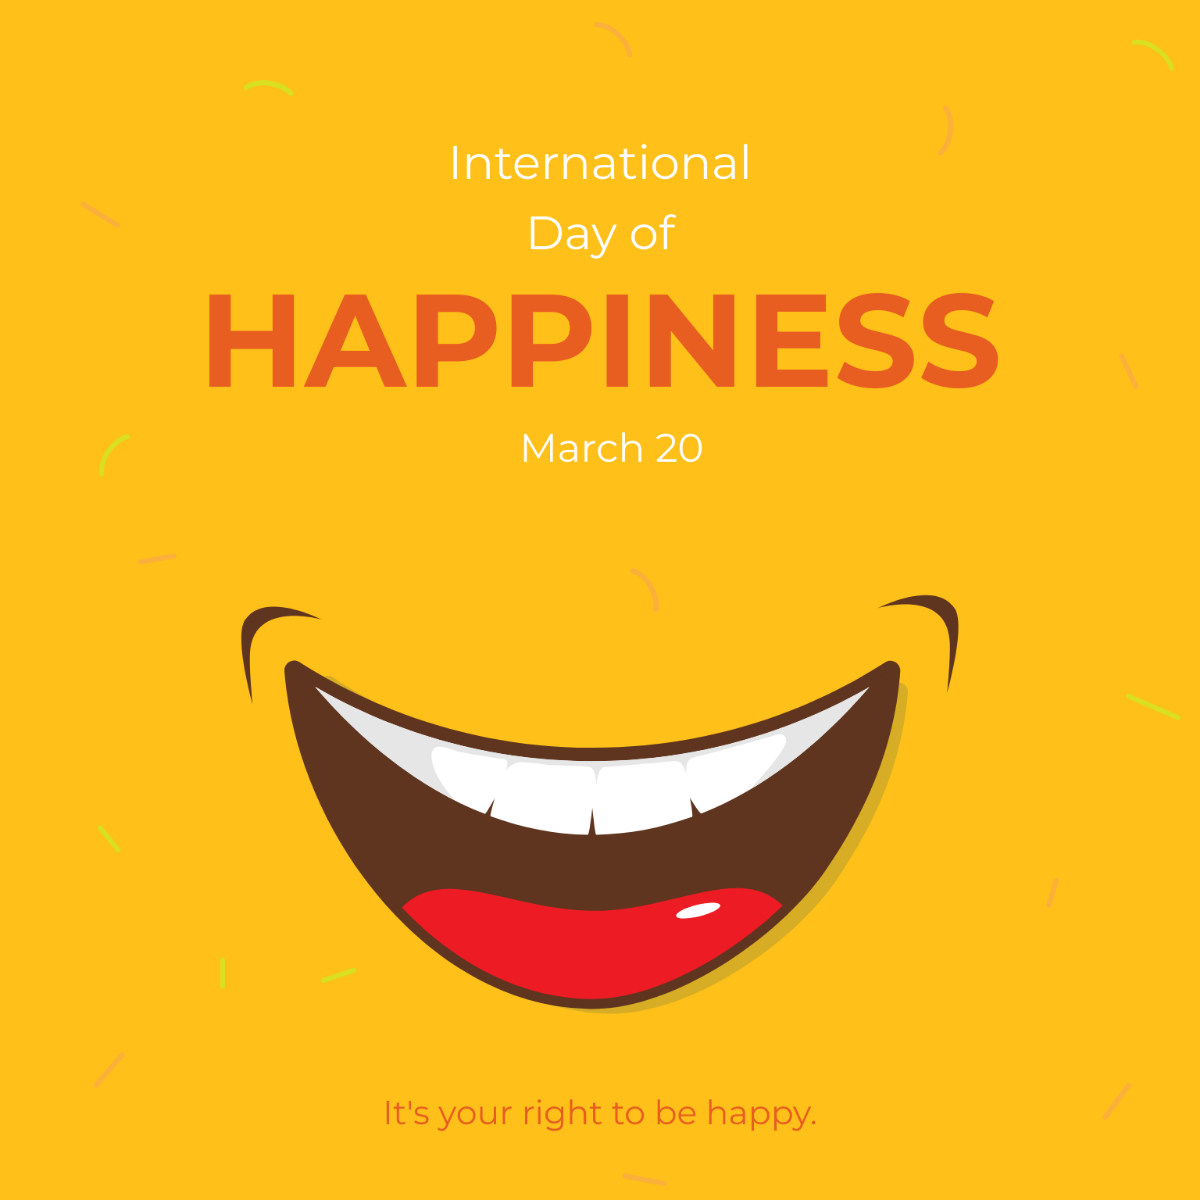 International Day of Happiness Flyer Vector